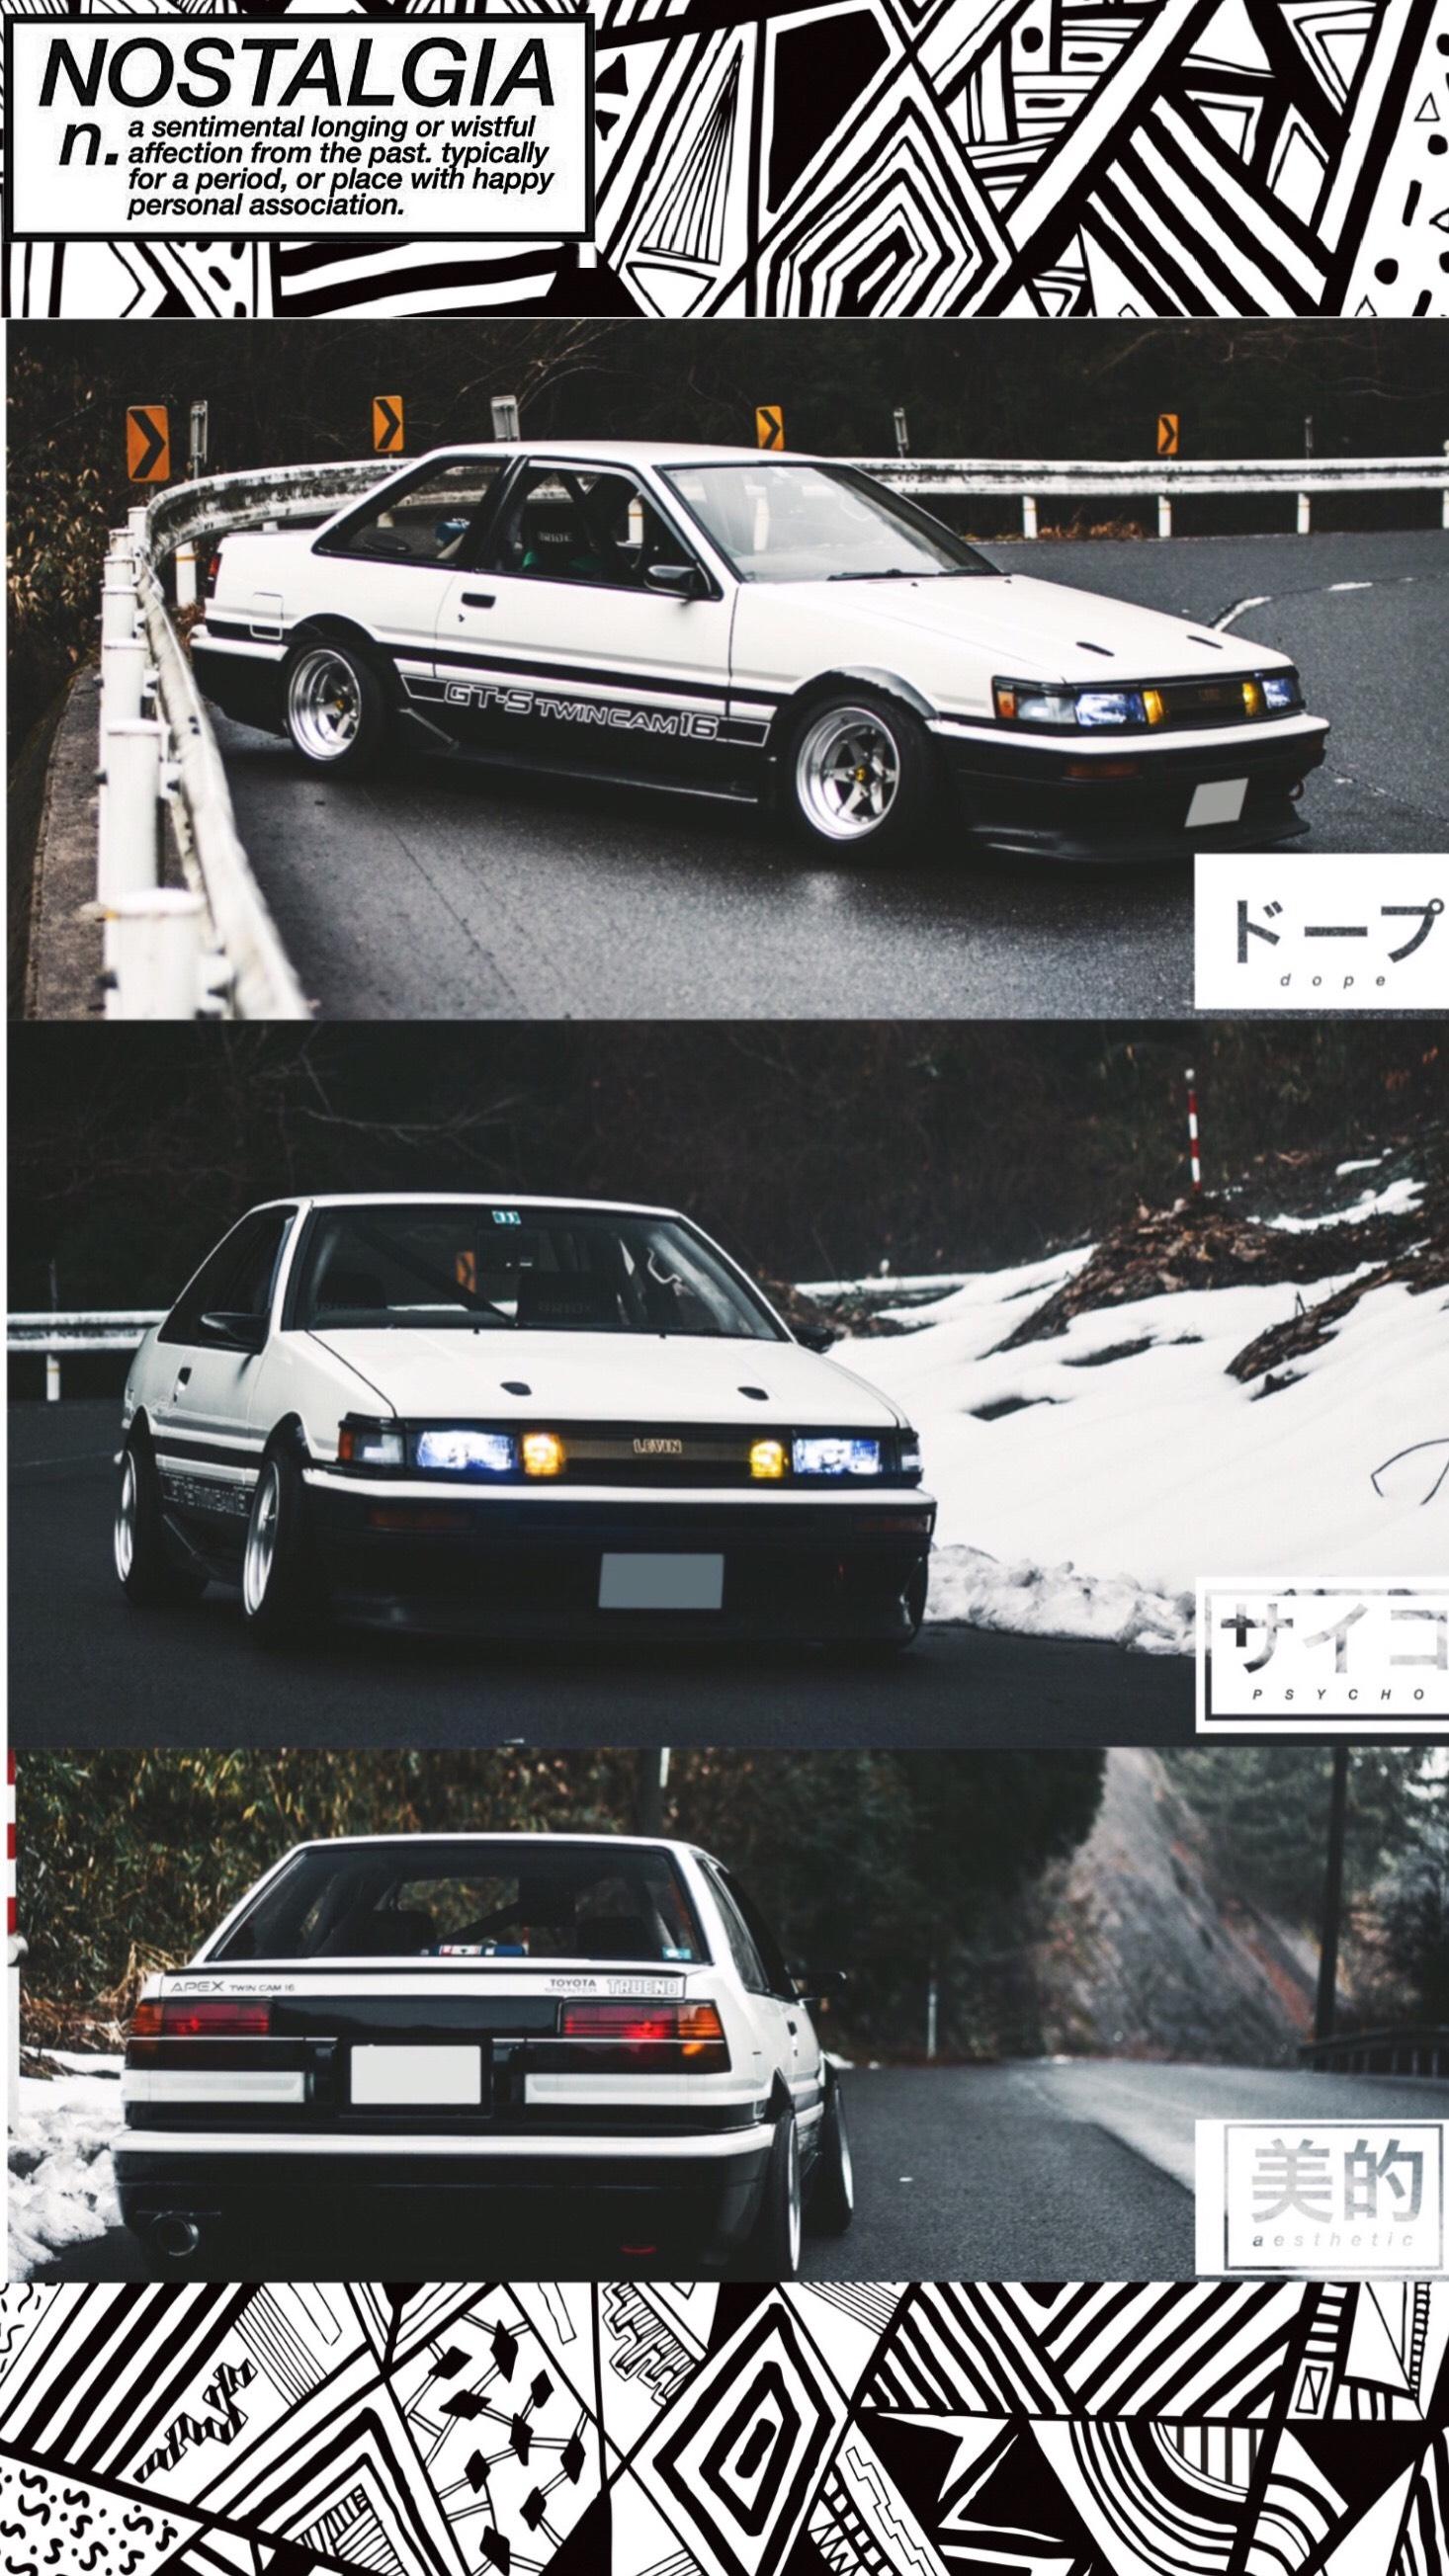 Hey guys. Here's my AE86 Levin wallpaper for iPhone I made. Enjoy